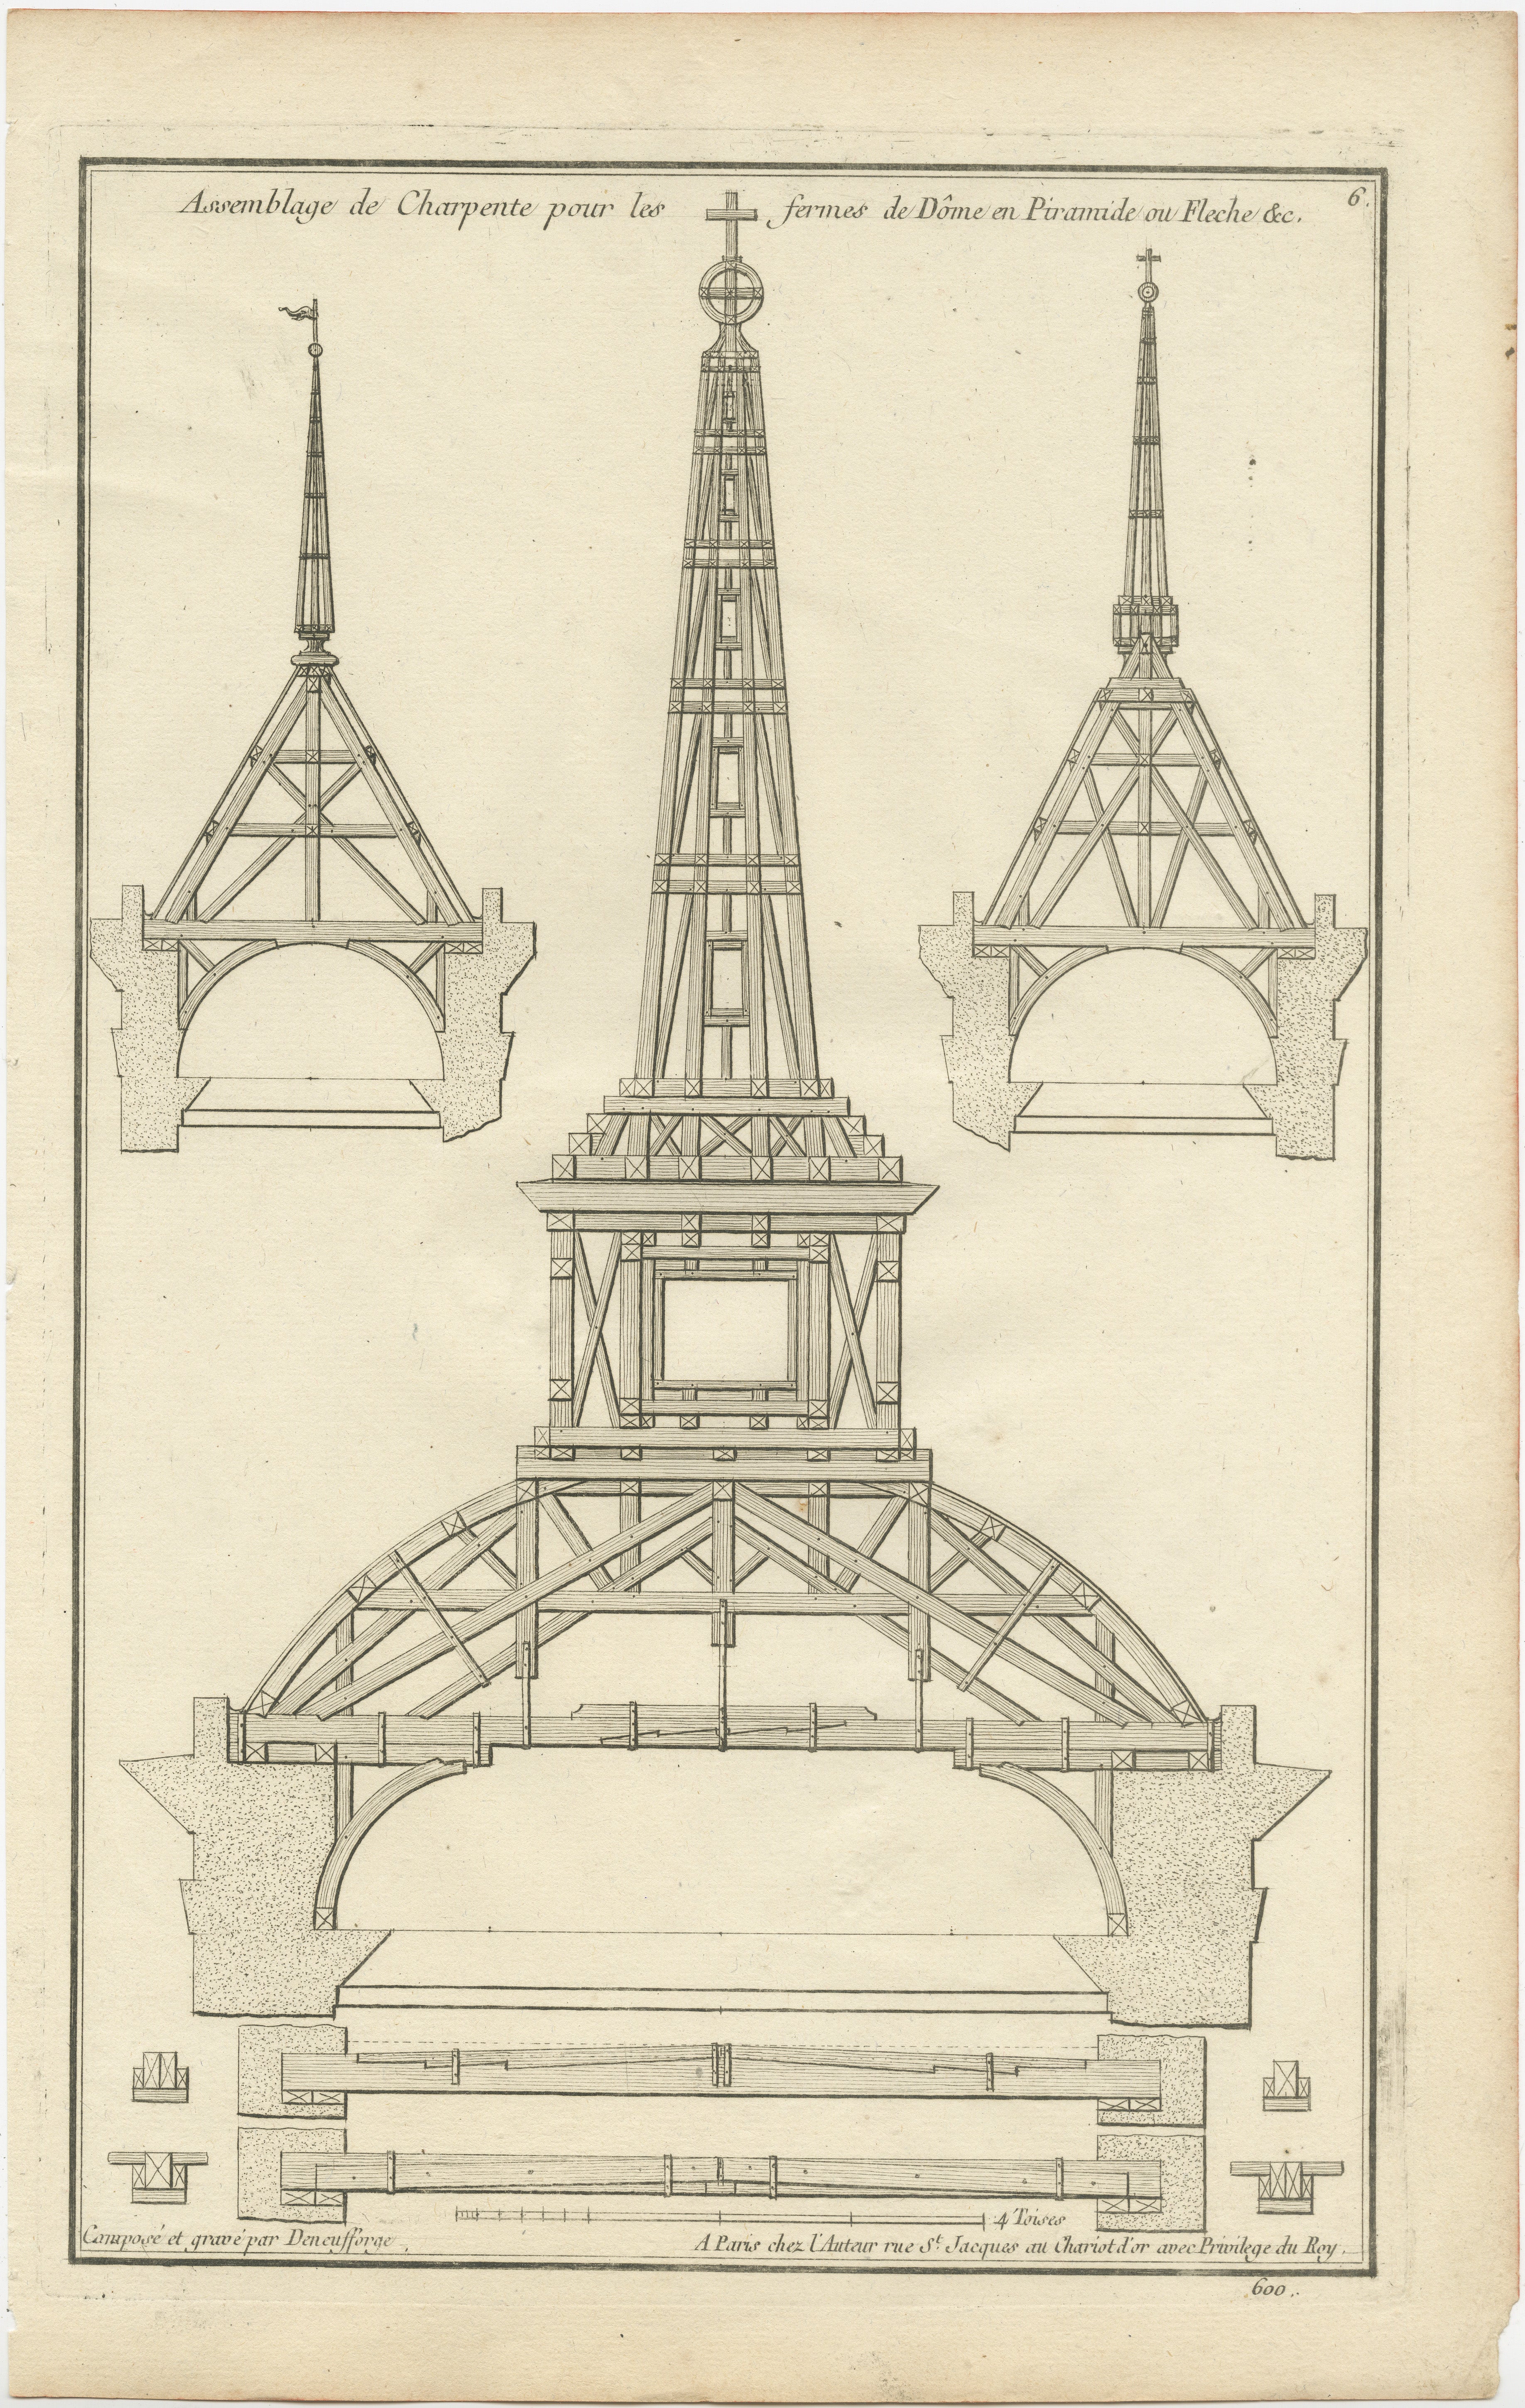 Architectural engravings by Jean-François de Neufforge (1714–1791). 

Neufforge was a Flemish engraver, architect, and publisher known for his work 